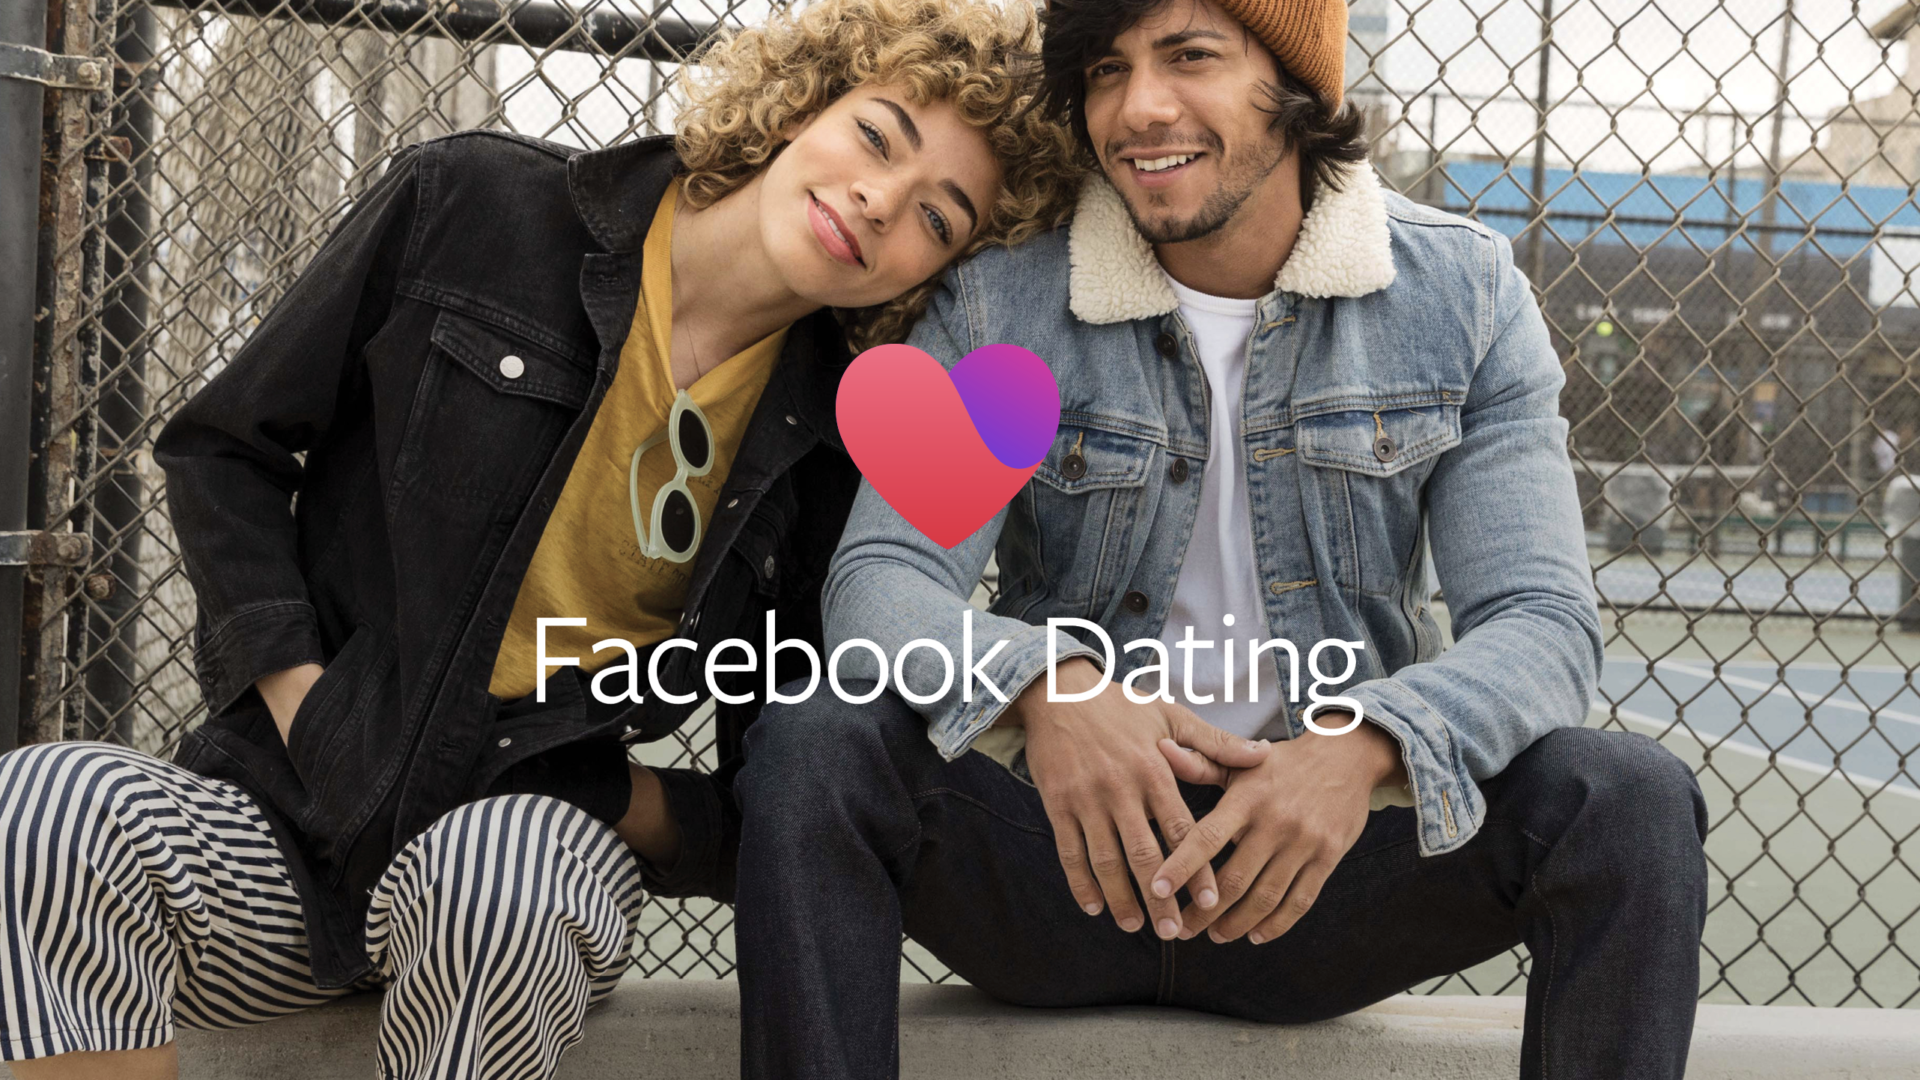 Facebook Dating Anyone? It Just Launched And This Is What You Need to Know